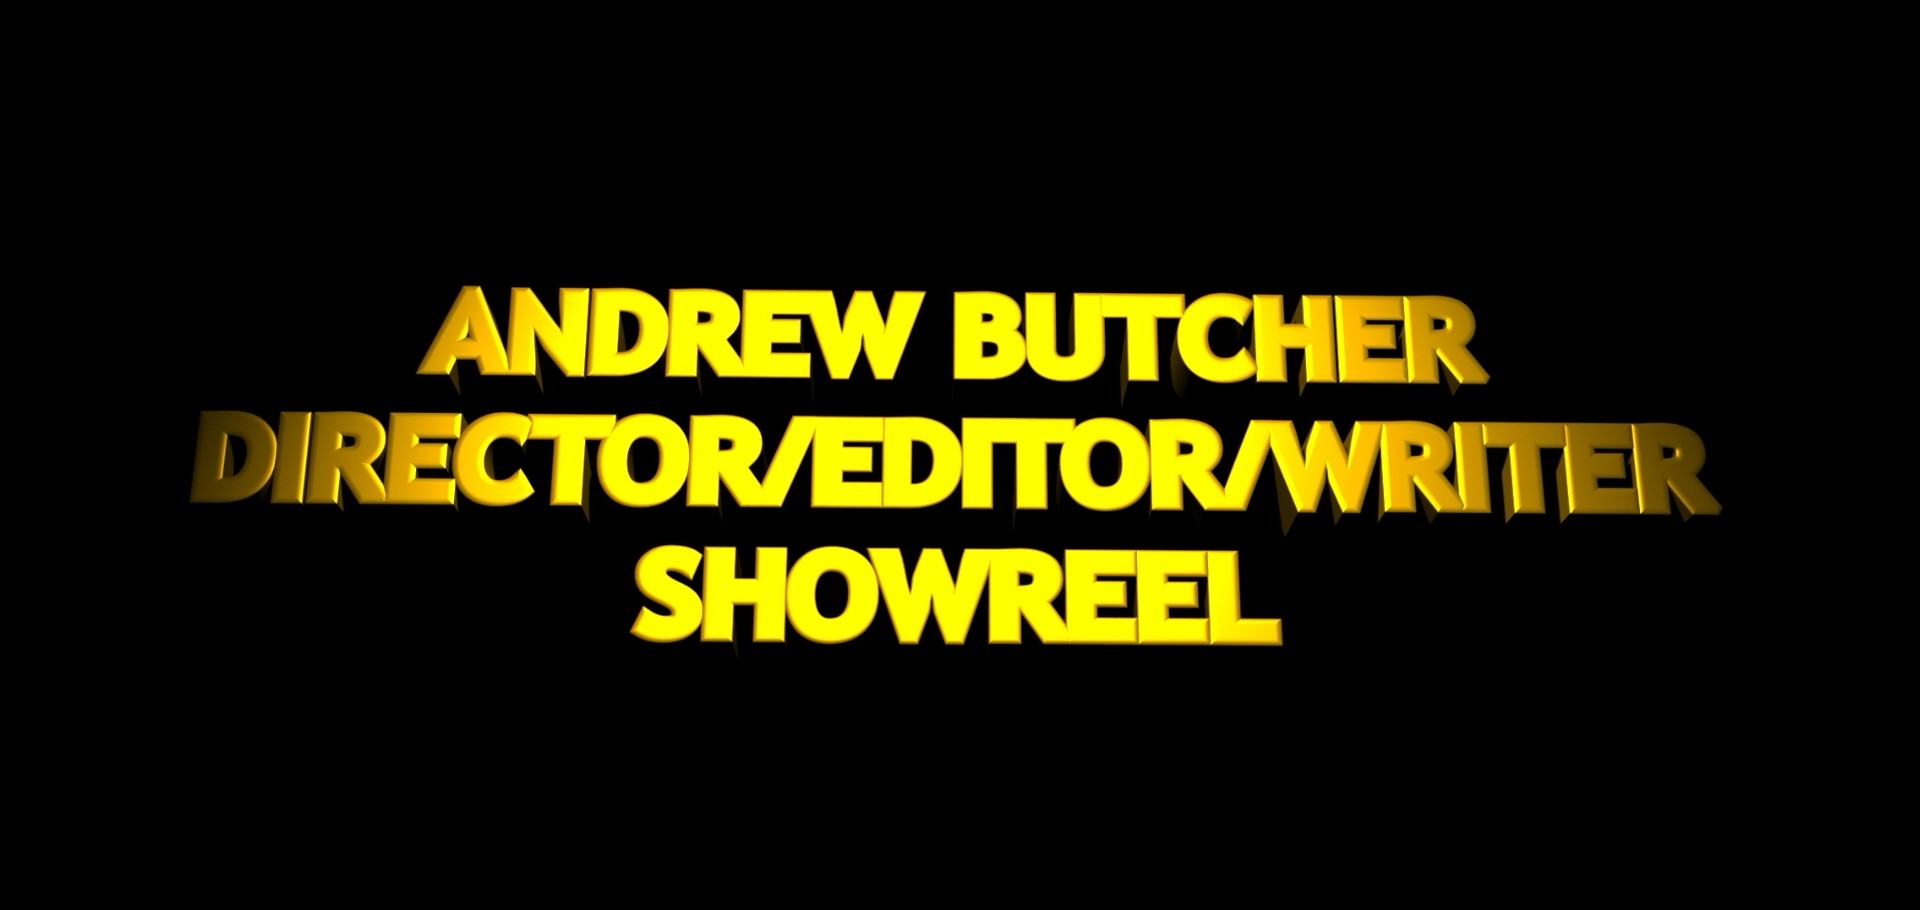 An image link to a visual showreel of Andrew Butcher's work up to date including short films, documentaries, fashion films and more